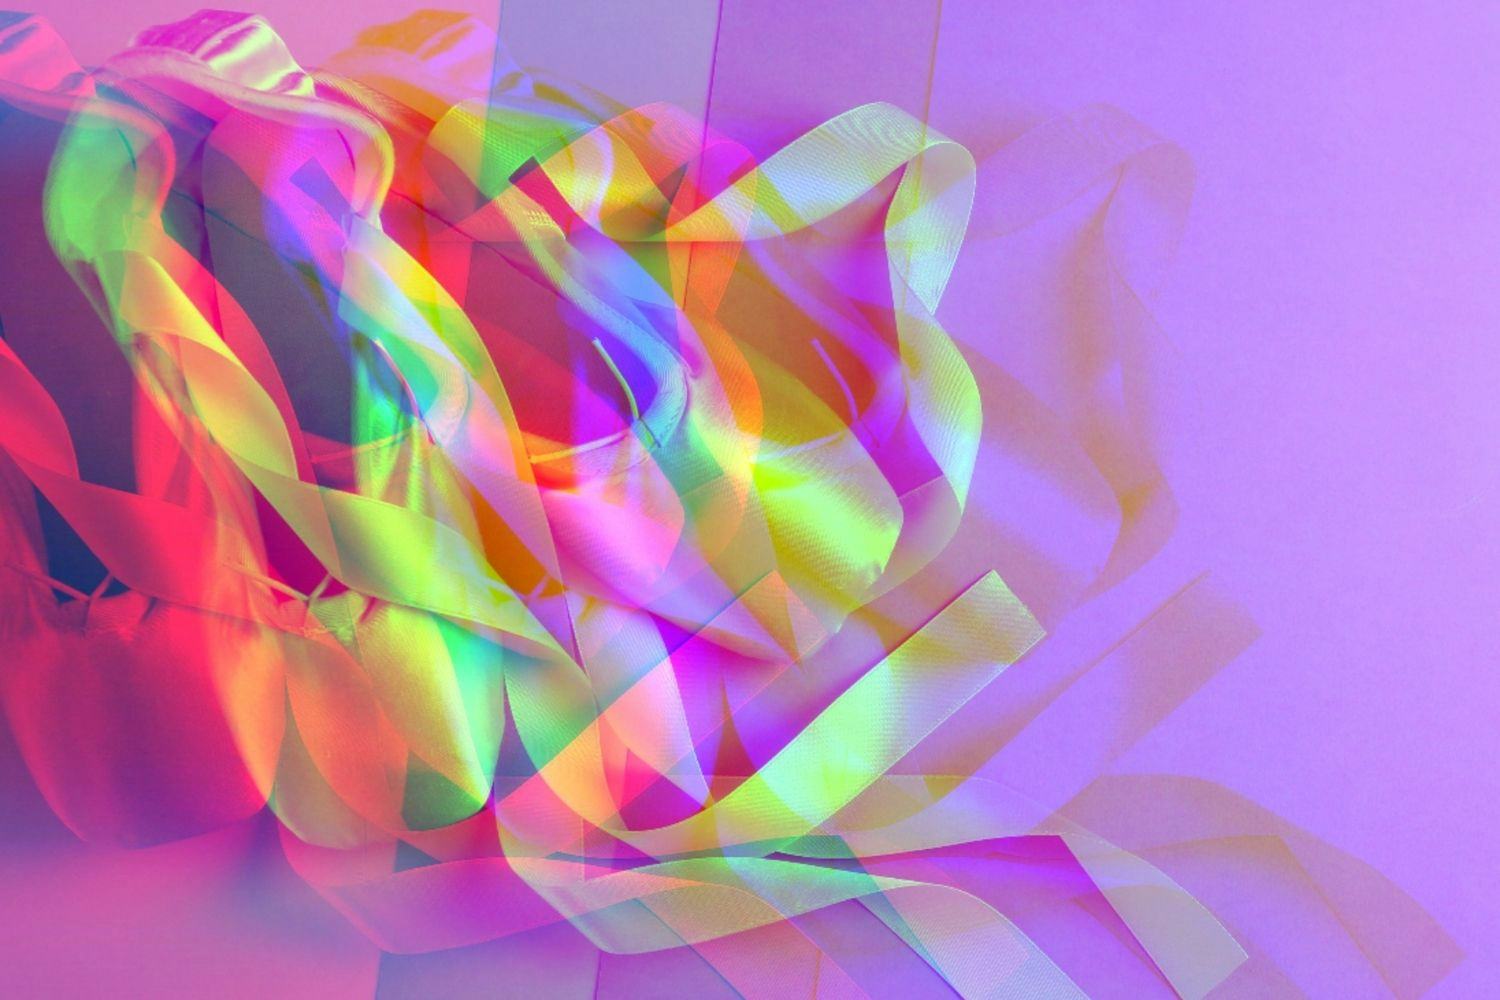 Image of ballet shoes through a somewhat kaleidoscopic lens. (Image credit: Canva).